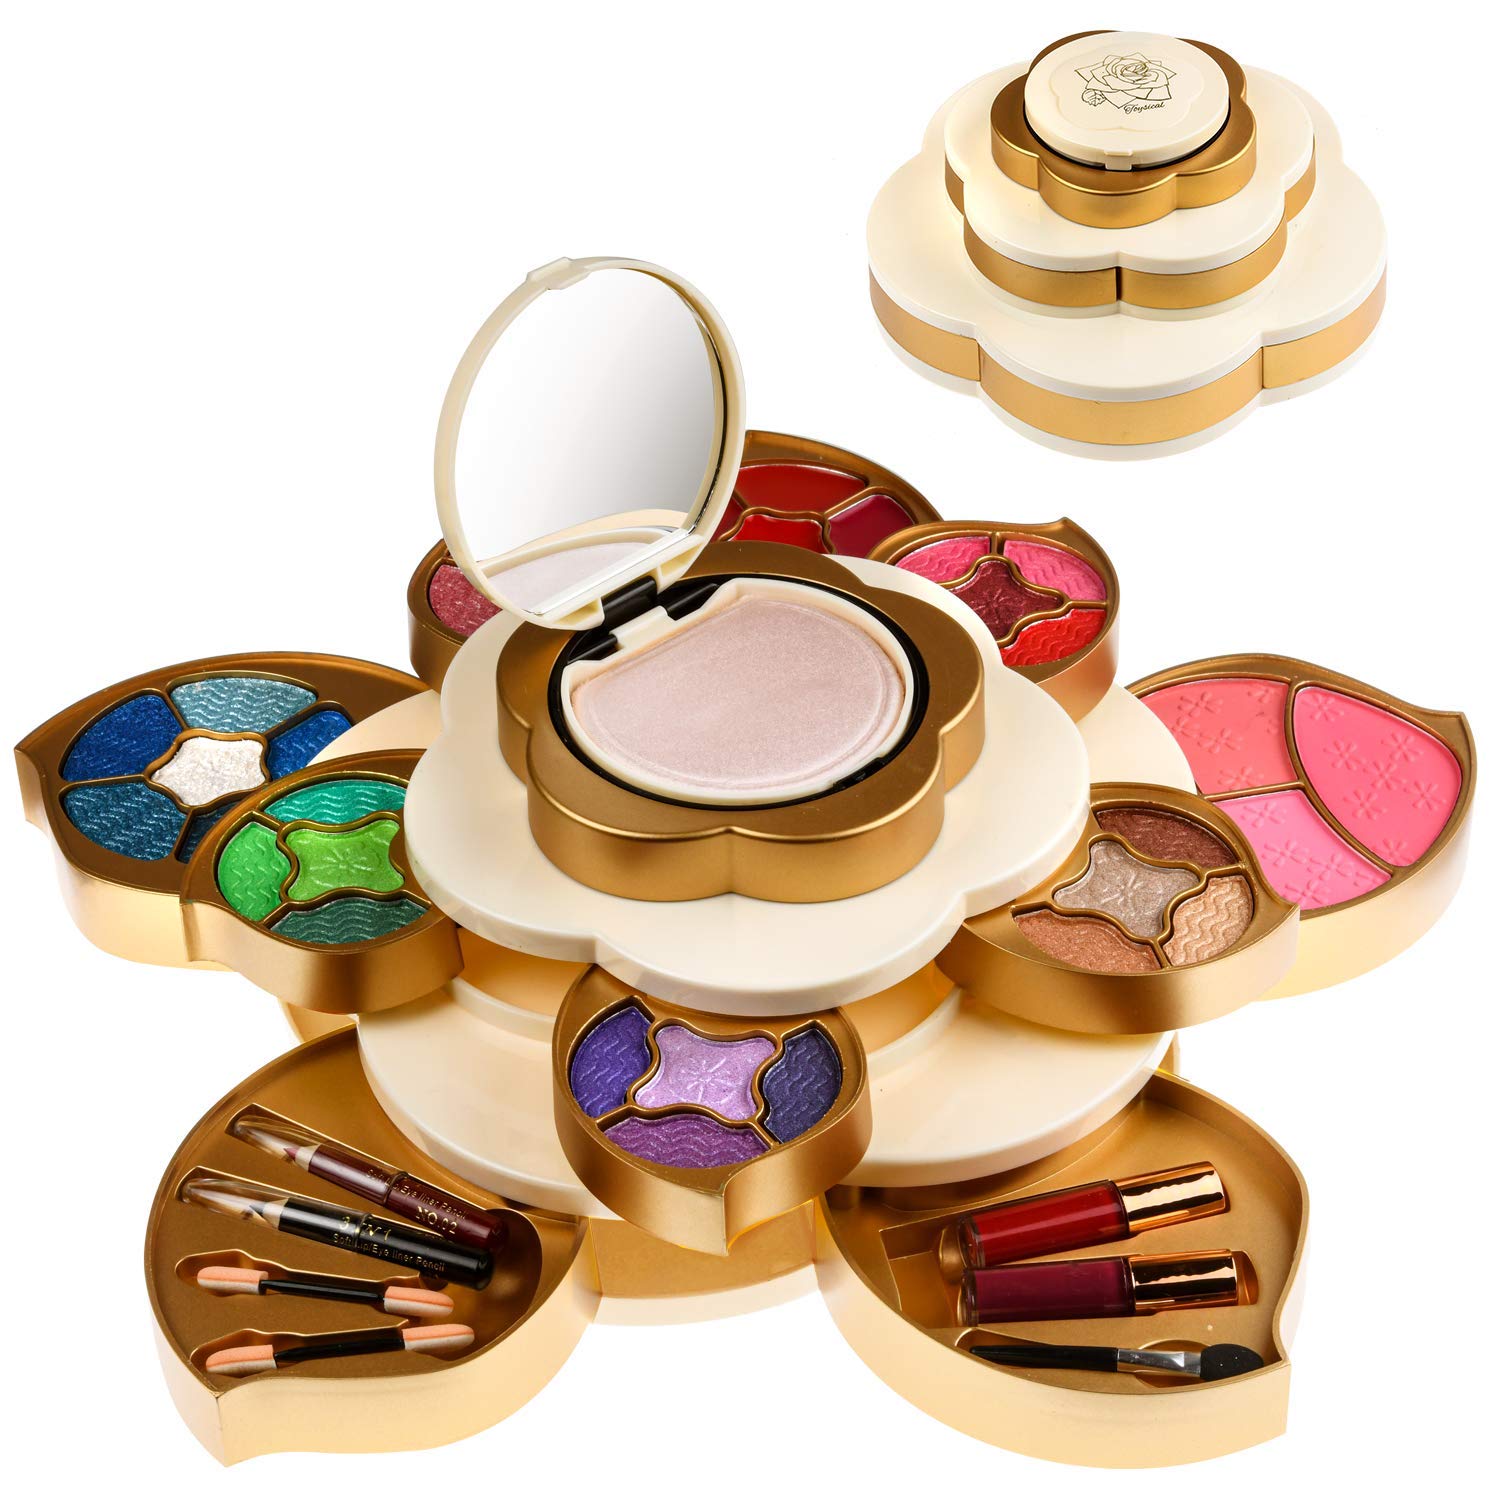 CoralBeau Makeup Kit for Women and Girls